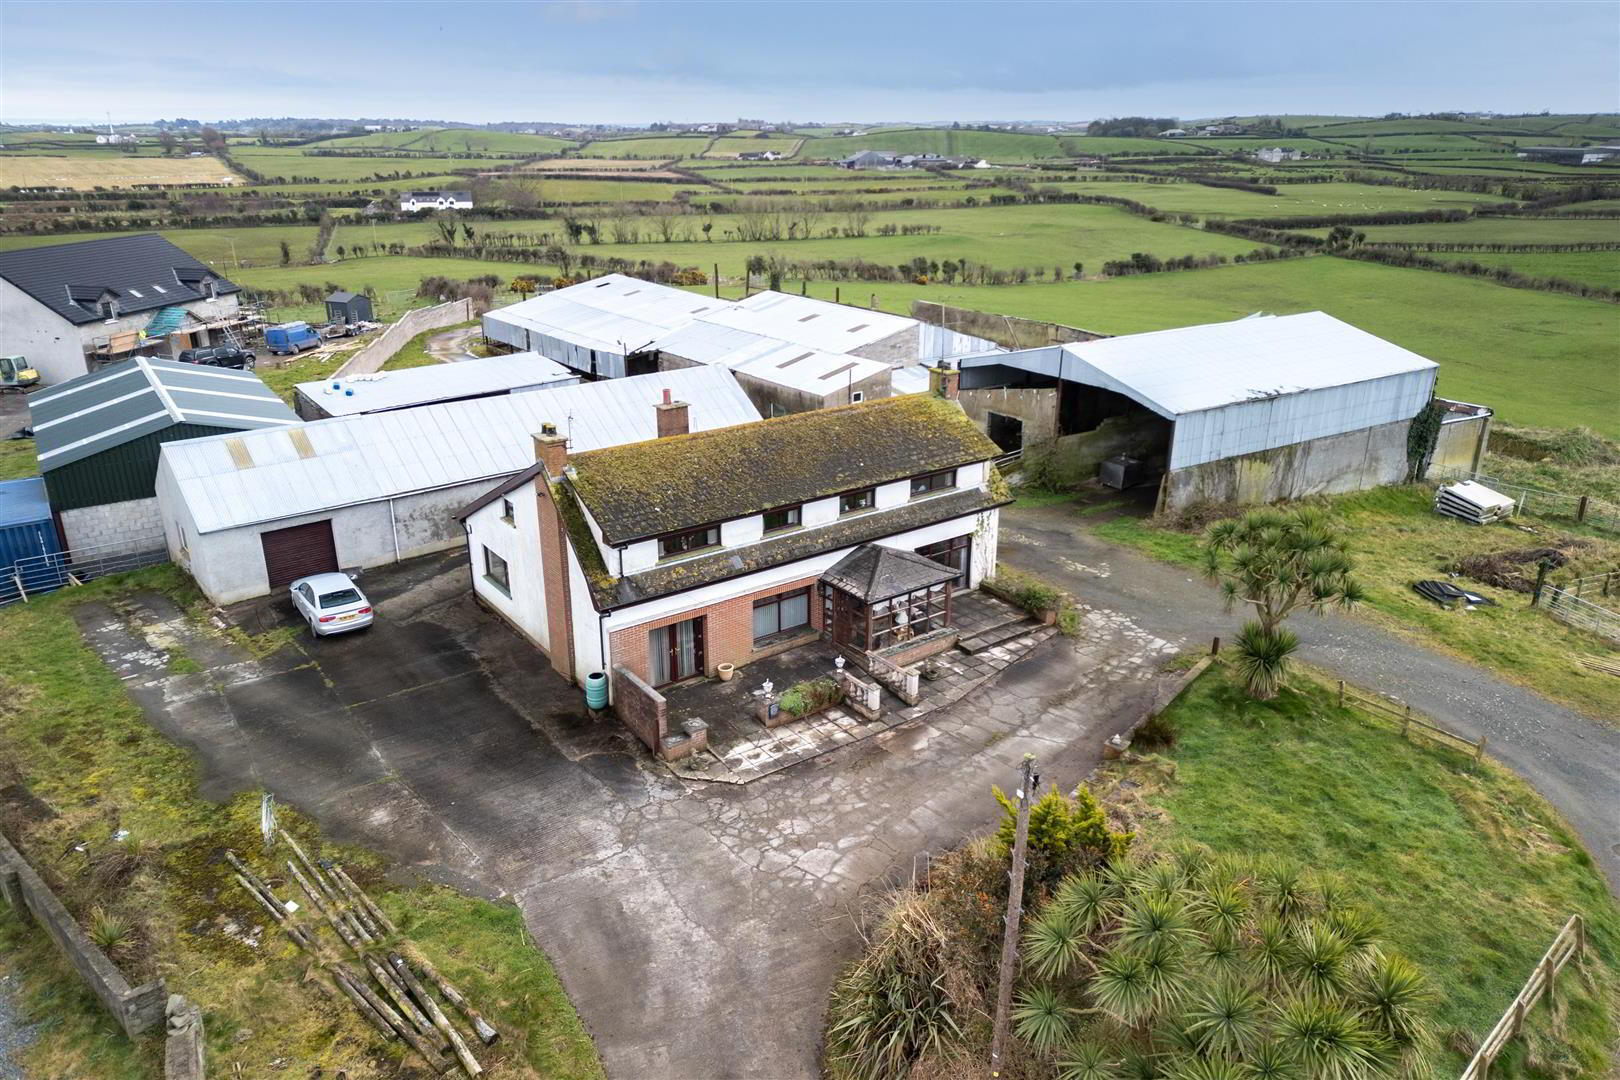 35 Acre Farm At, 7 Cardy Road